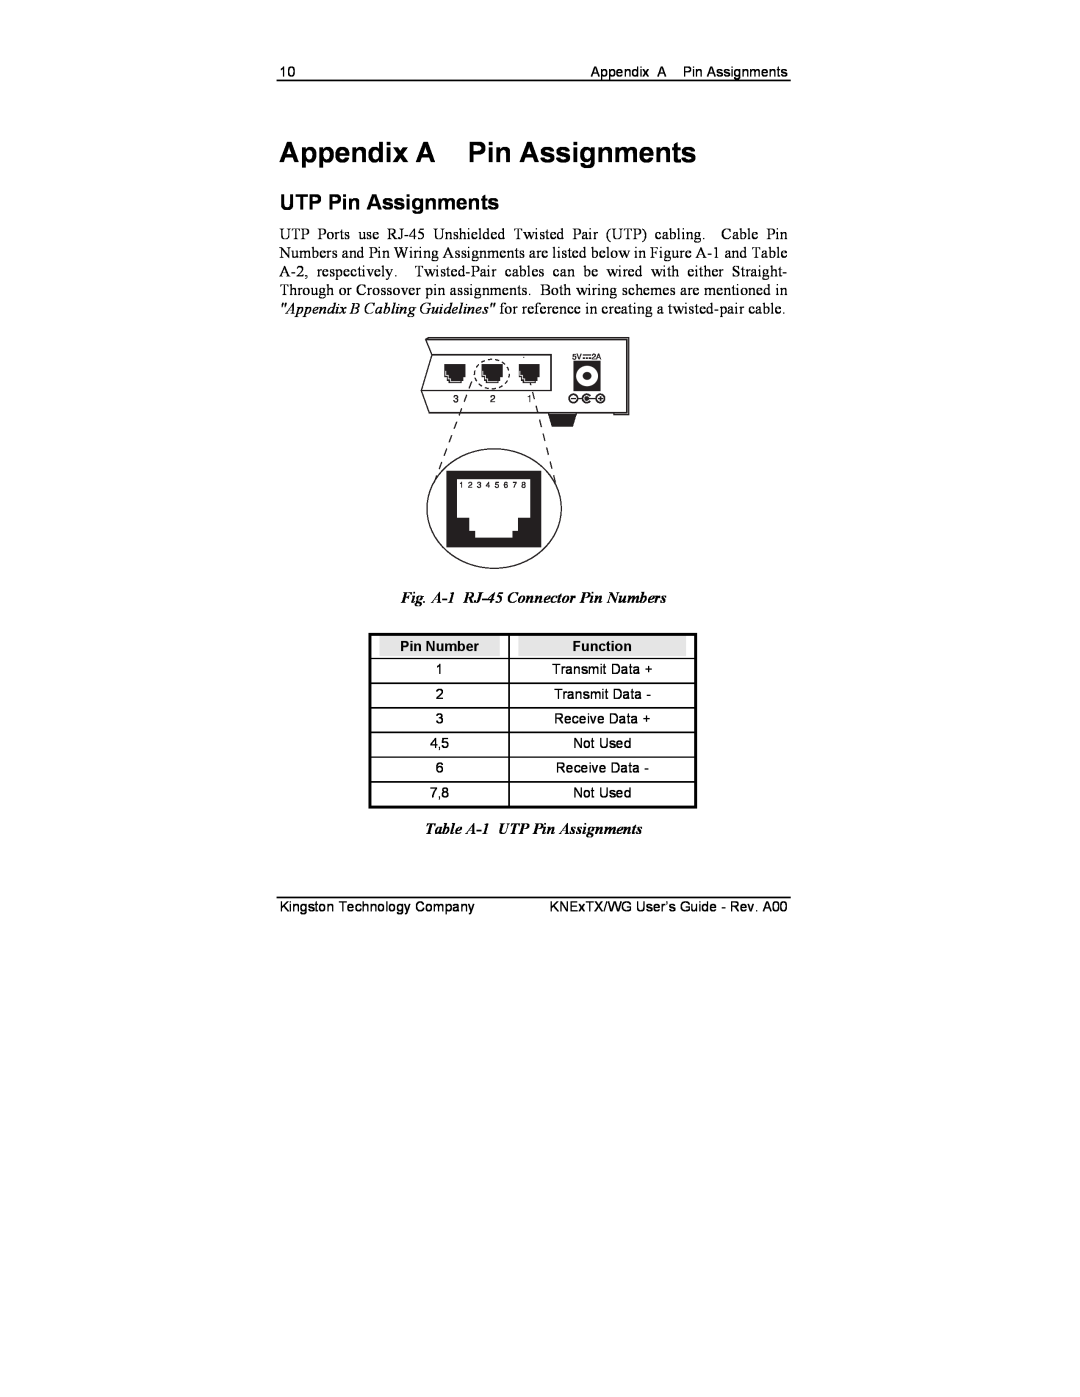 Kingston Technology KNE8TX/WG manual Appendix A Pin Assignments, UTP Pin Assignments, Fig. A-1 RJ-45 Connector Pin Numbers 